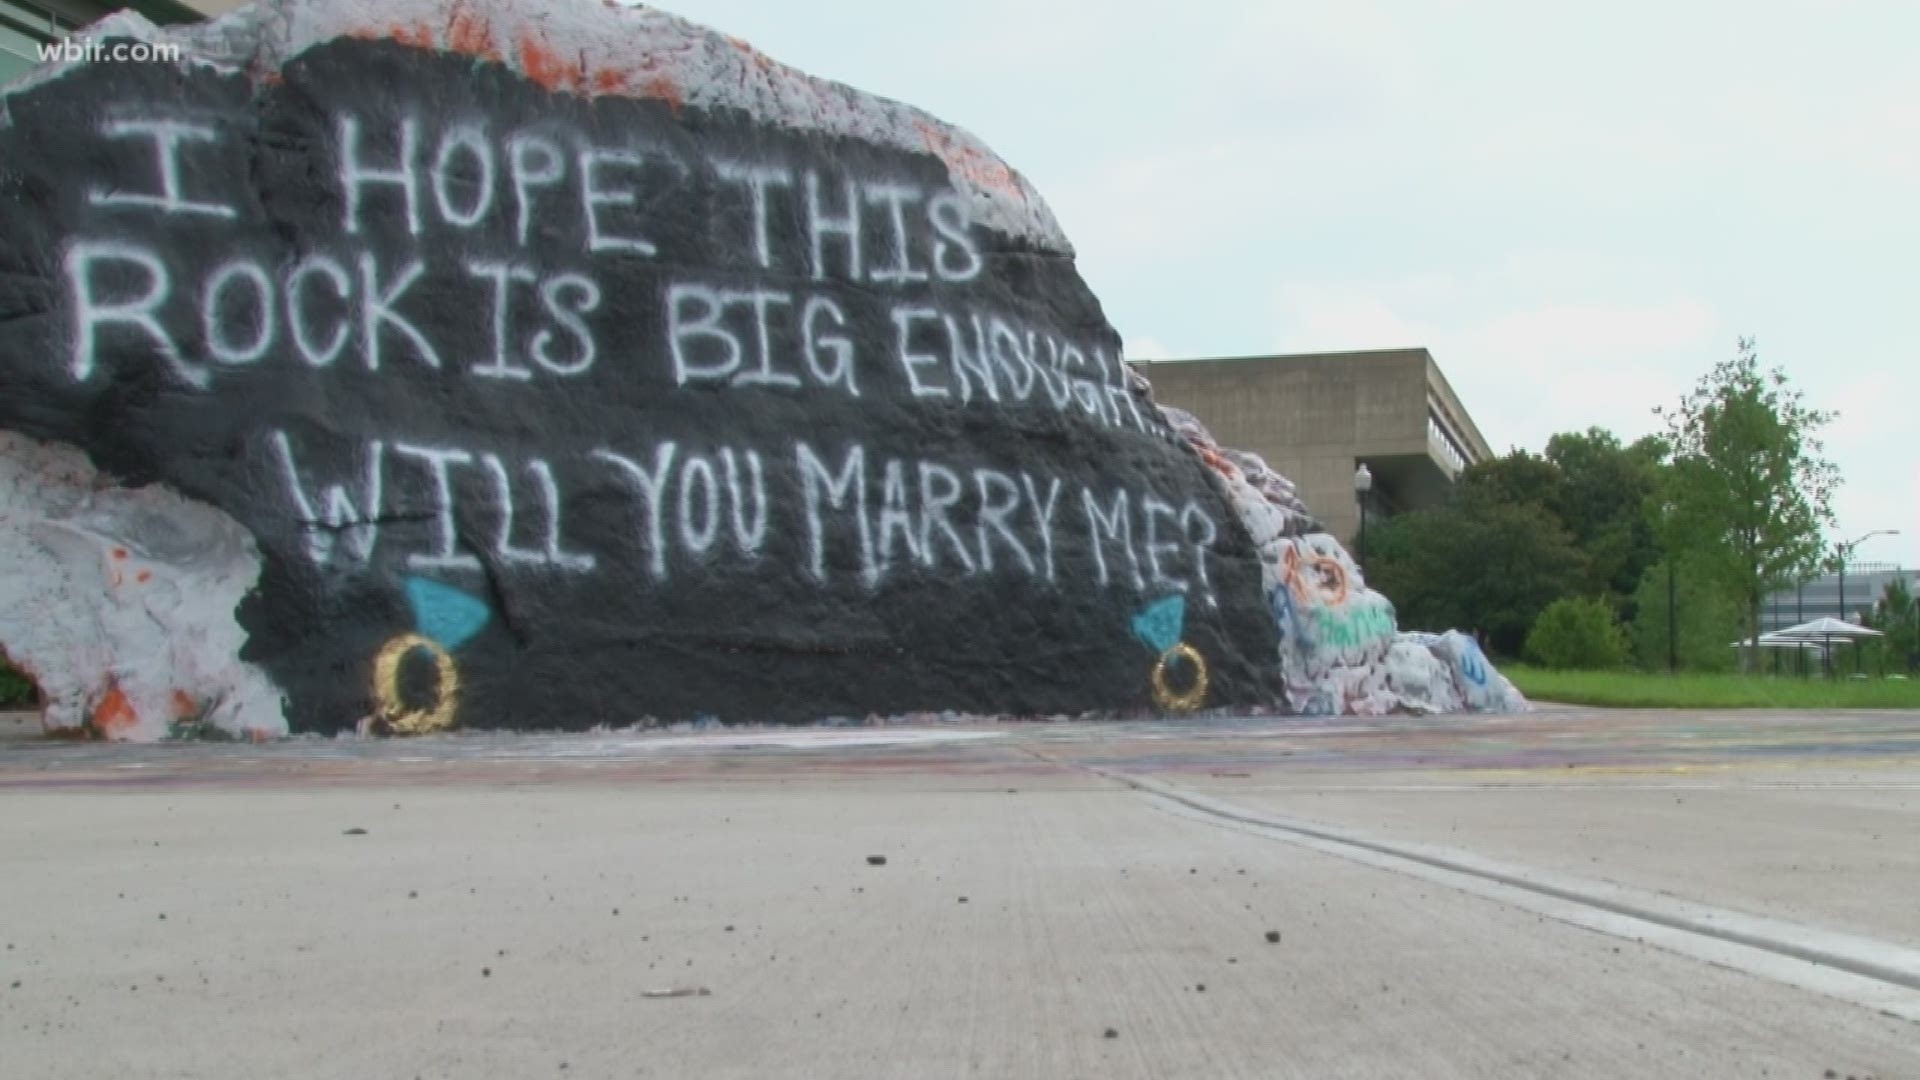 We're not sure how much paint it took - but one person used the UT Rock to ask a big question.